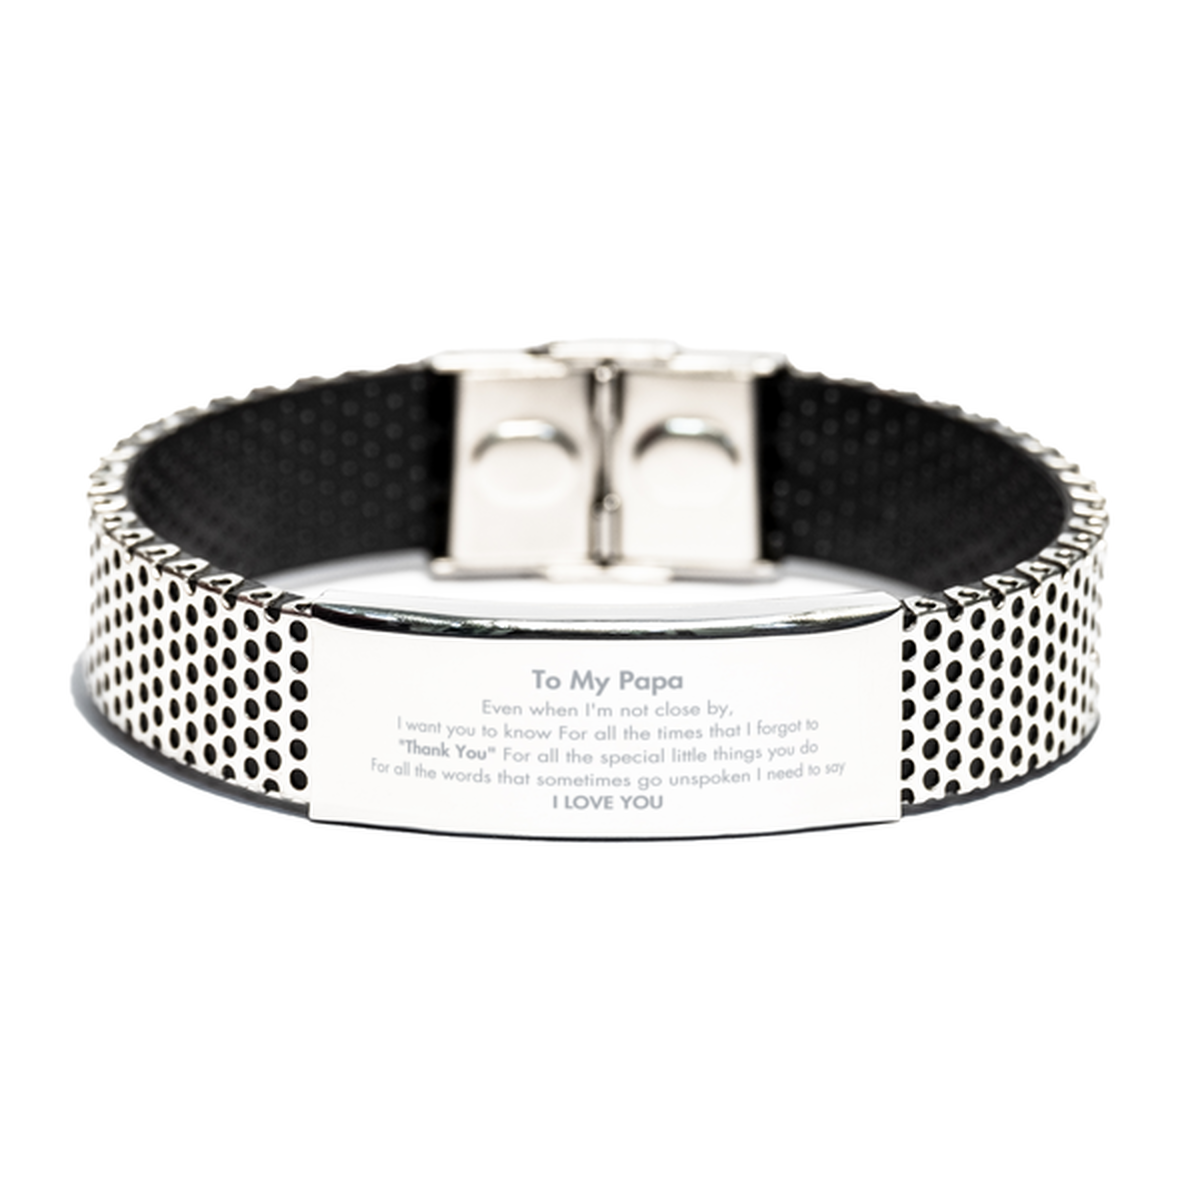 Thank You Gifts for Papa, Keepsake Stainless Steel Bracelet Gifts for Papa Birthday Mother's day Father's Day Papa For all the words That sometimes go unspoken I need to say I LOVE YOU